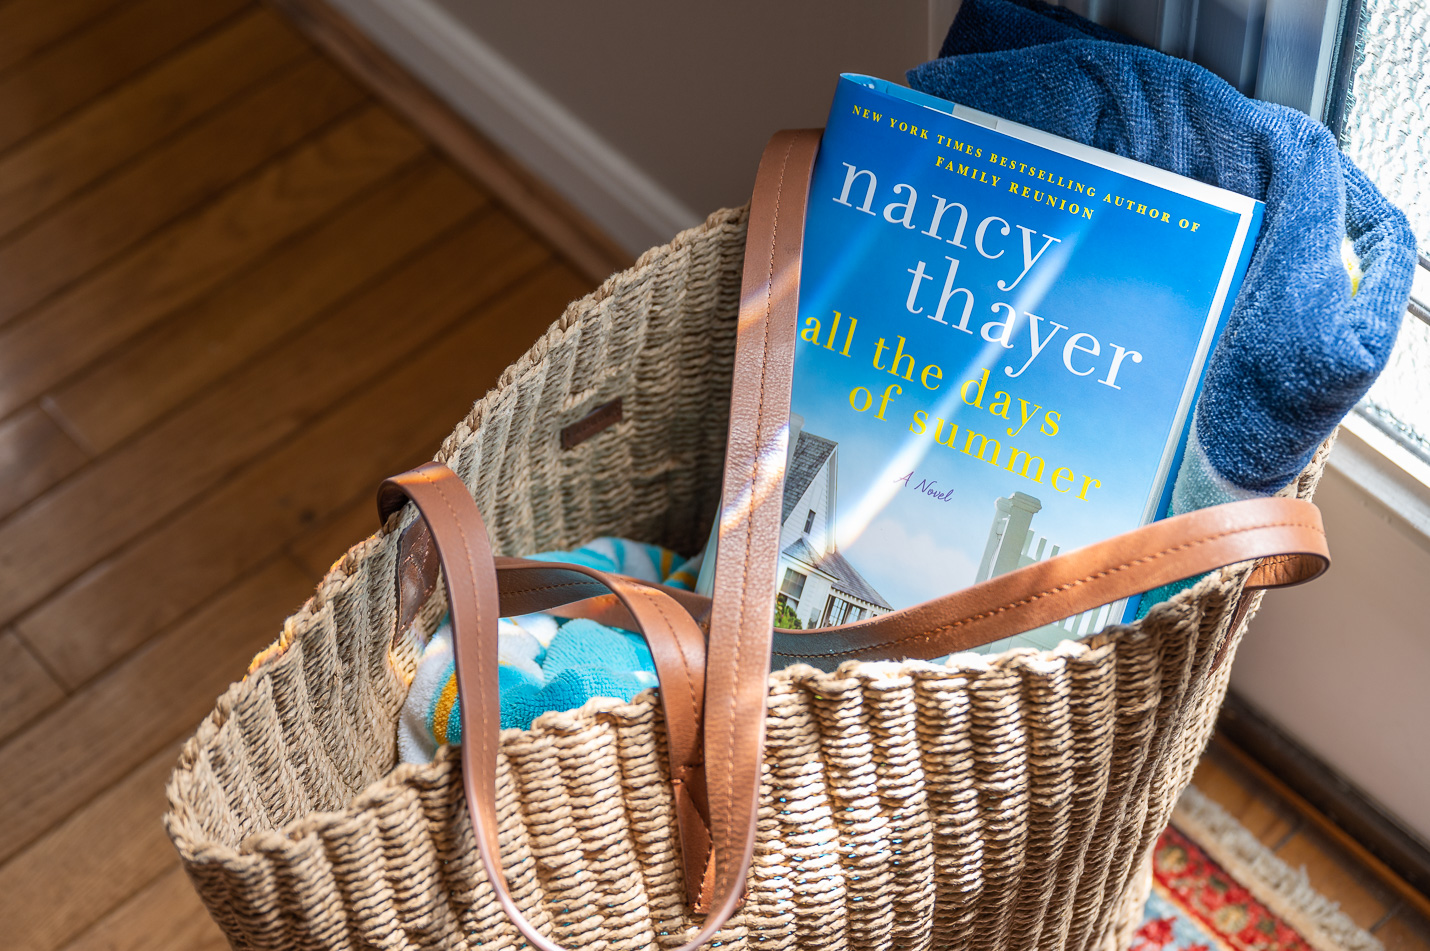 Nancy Thayer's All the Days of Summer